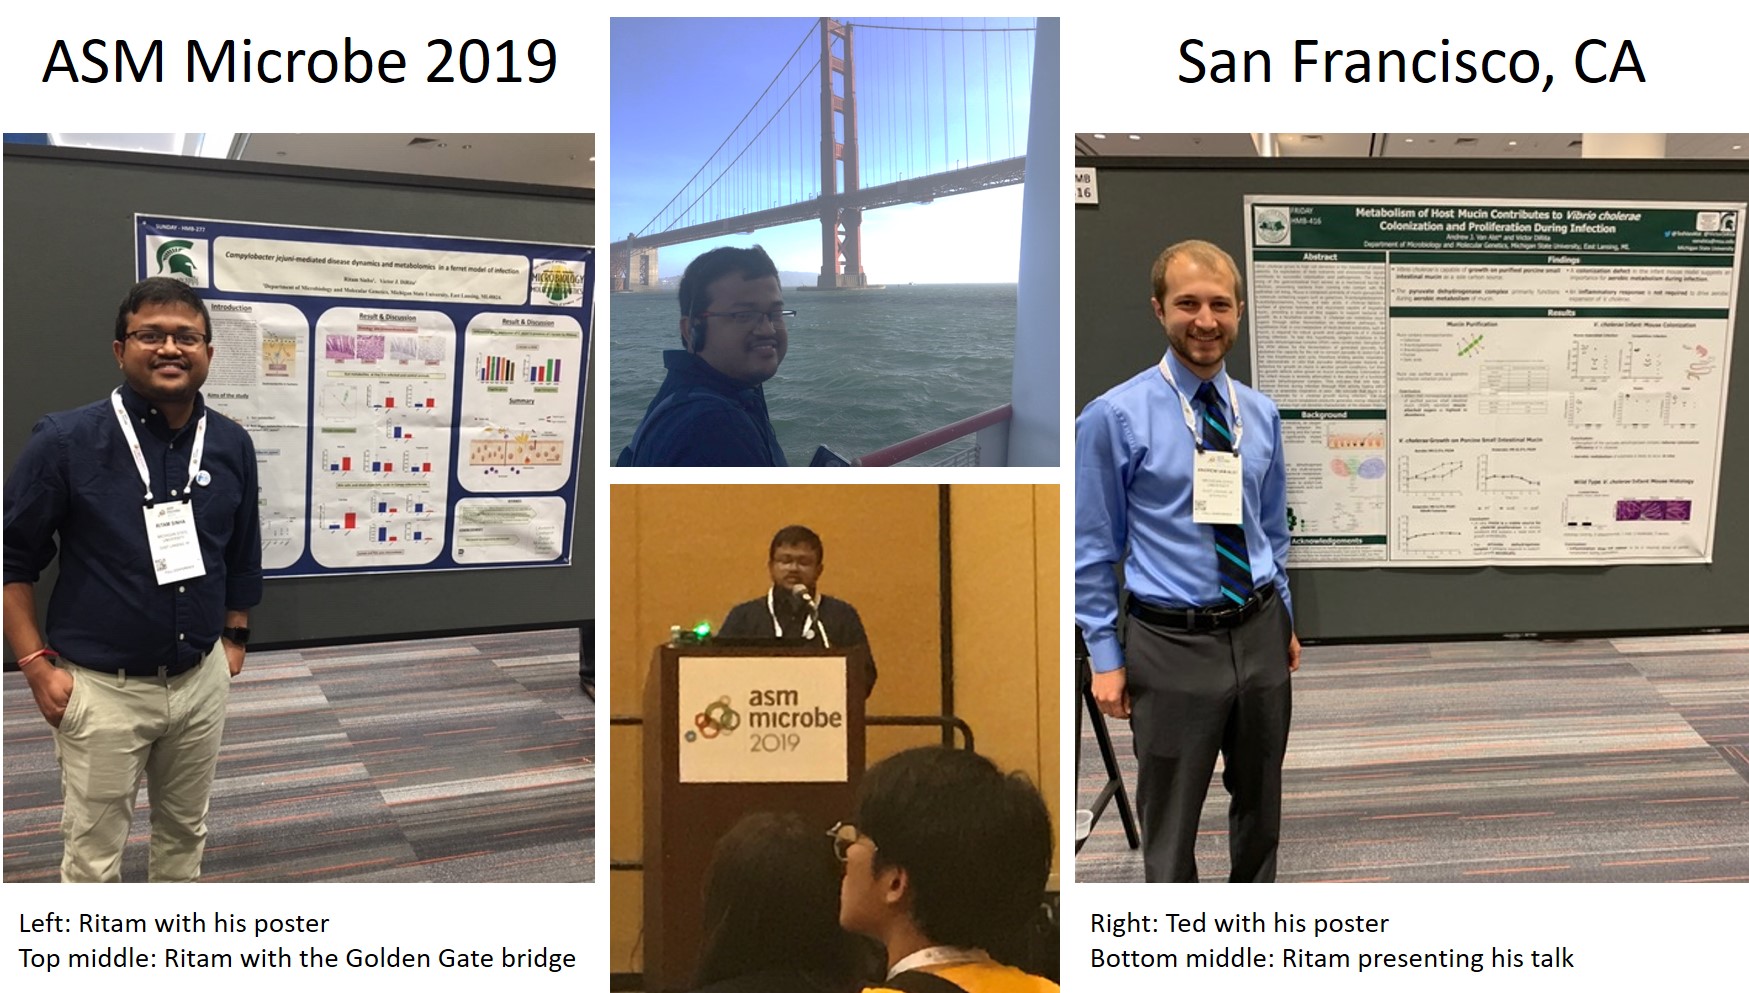 2019 American Society for Microbiology conference collage